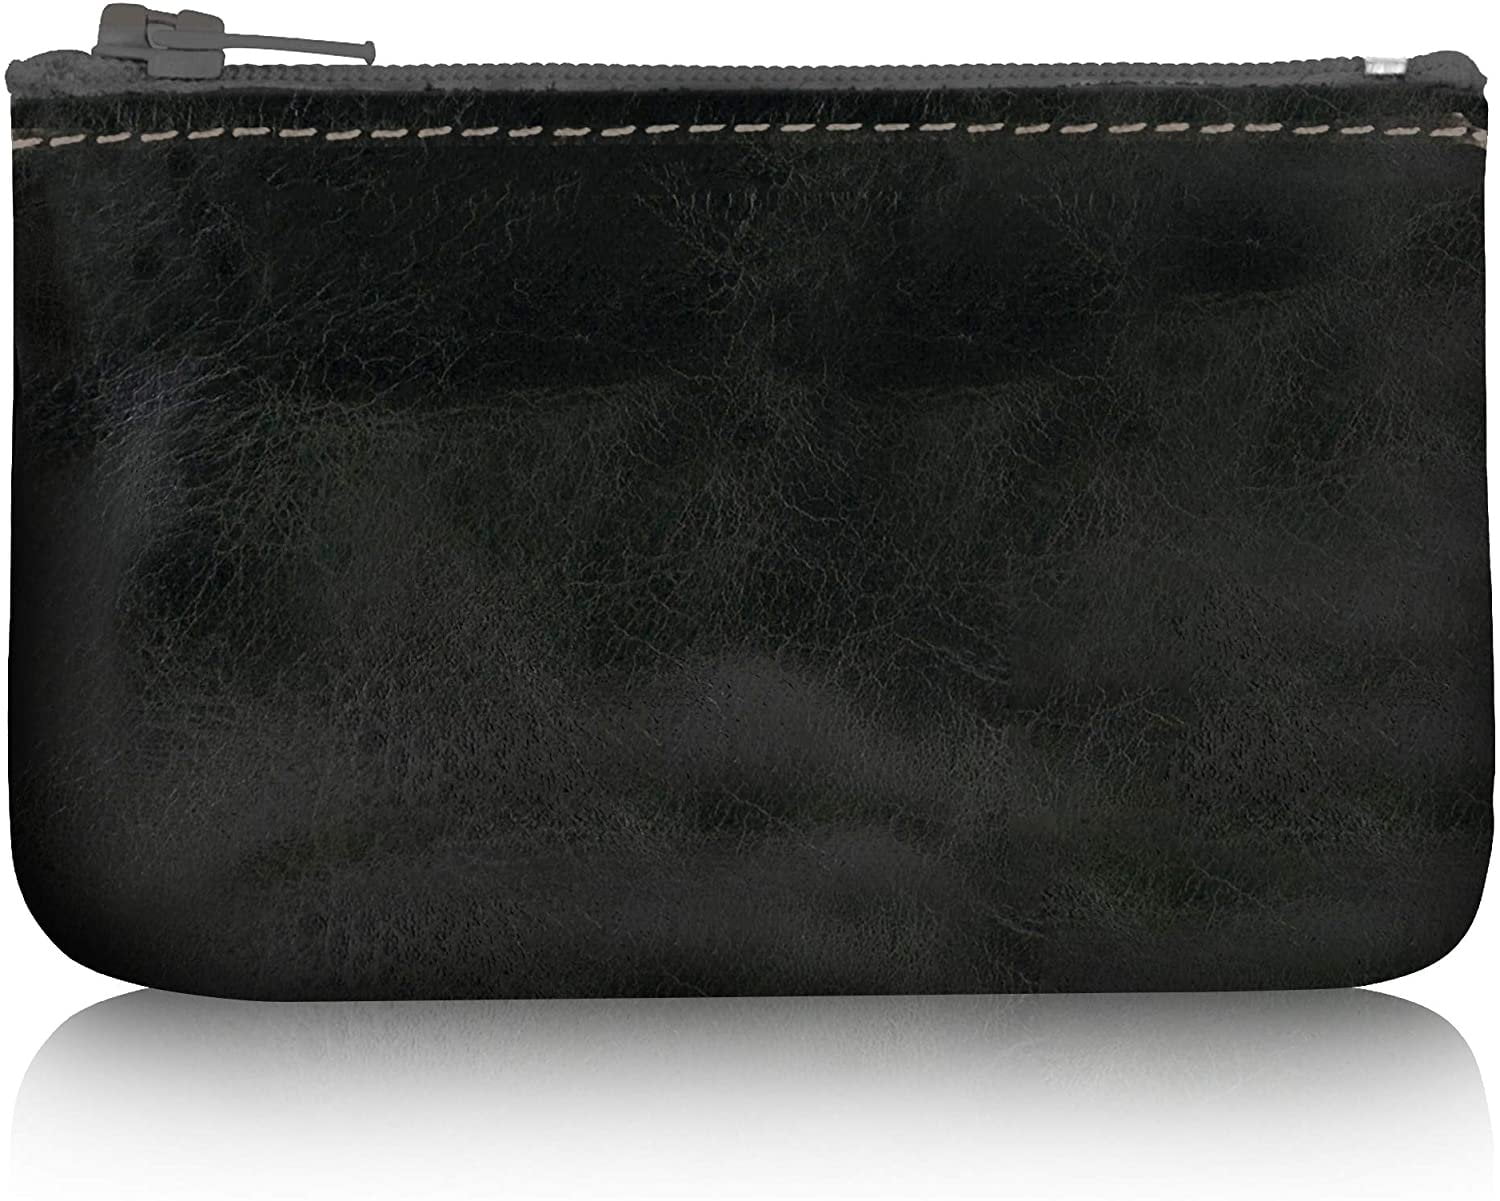 Change U.S.A New Mens or Womens Black Leather Zippered Coin Pouch Purse 